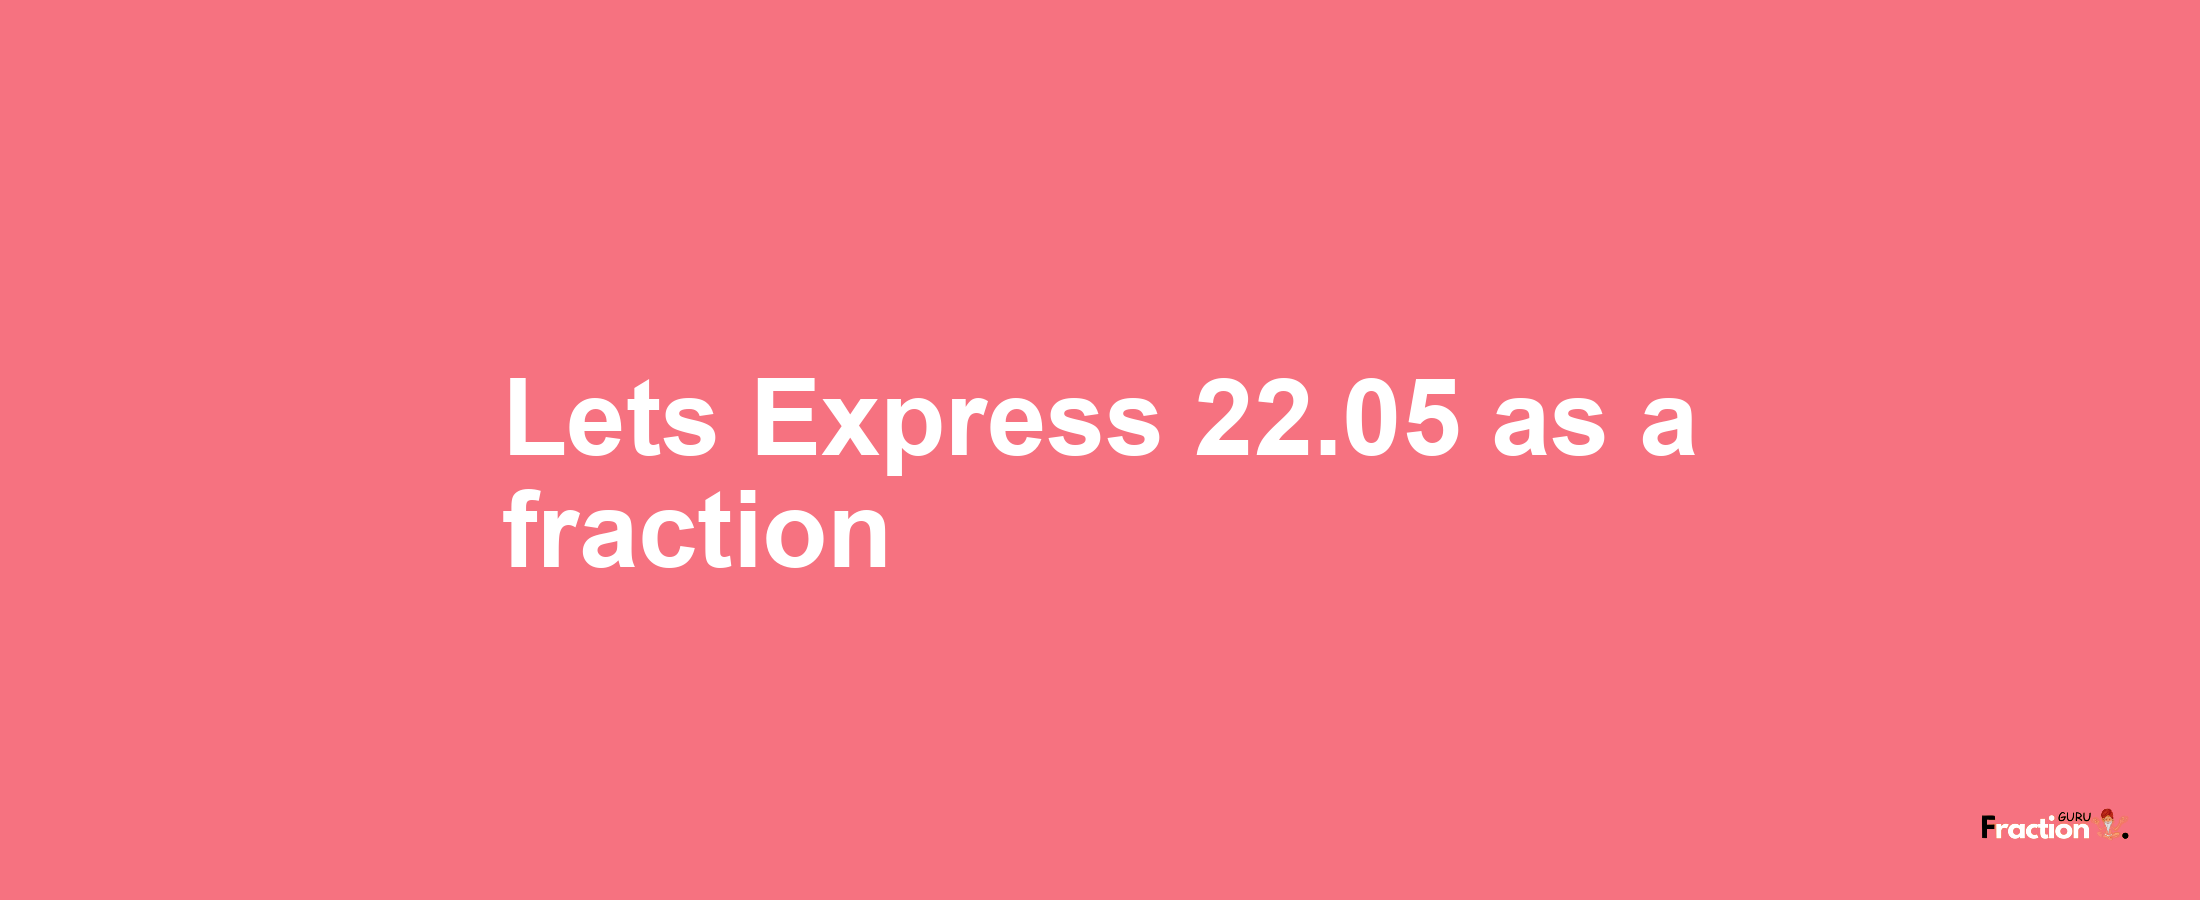 Lets Express 22.05 as afraction